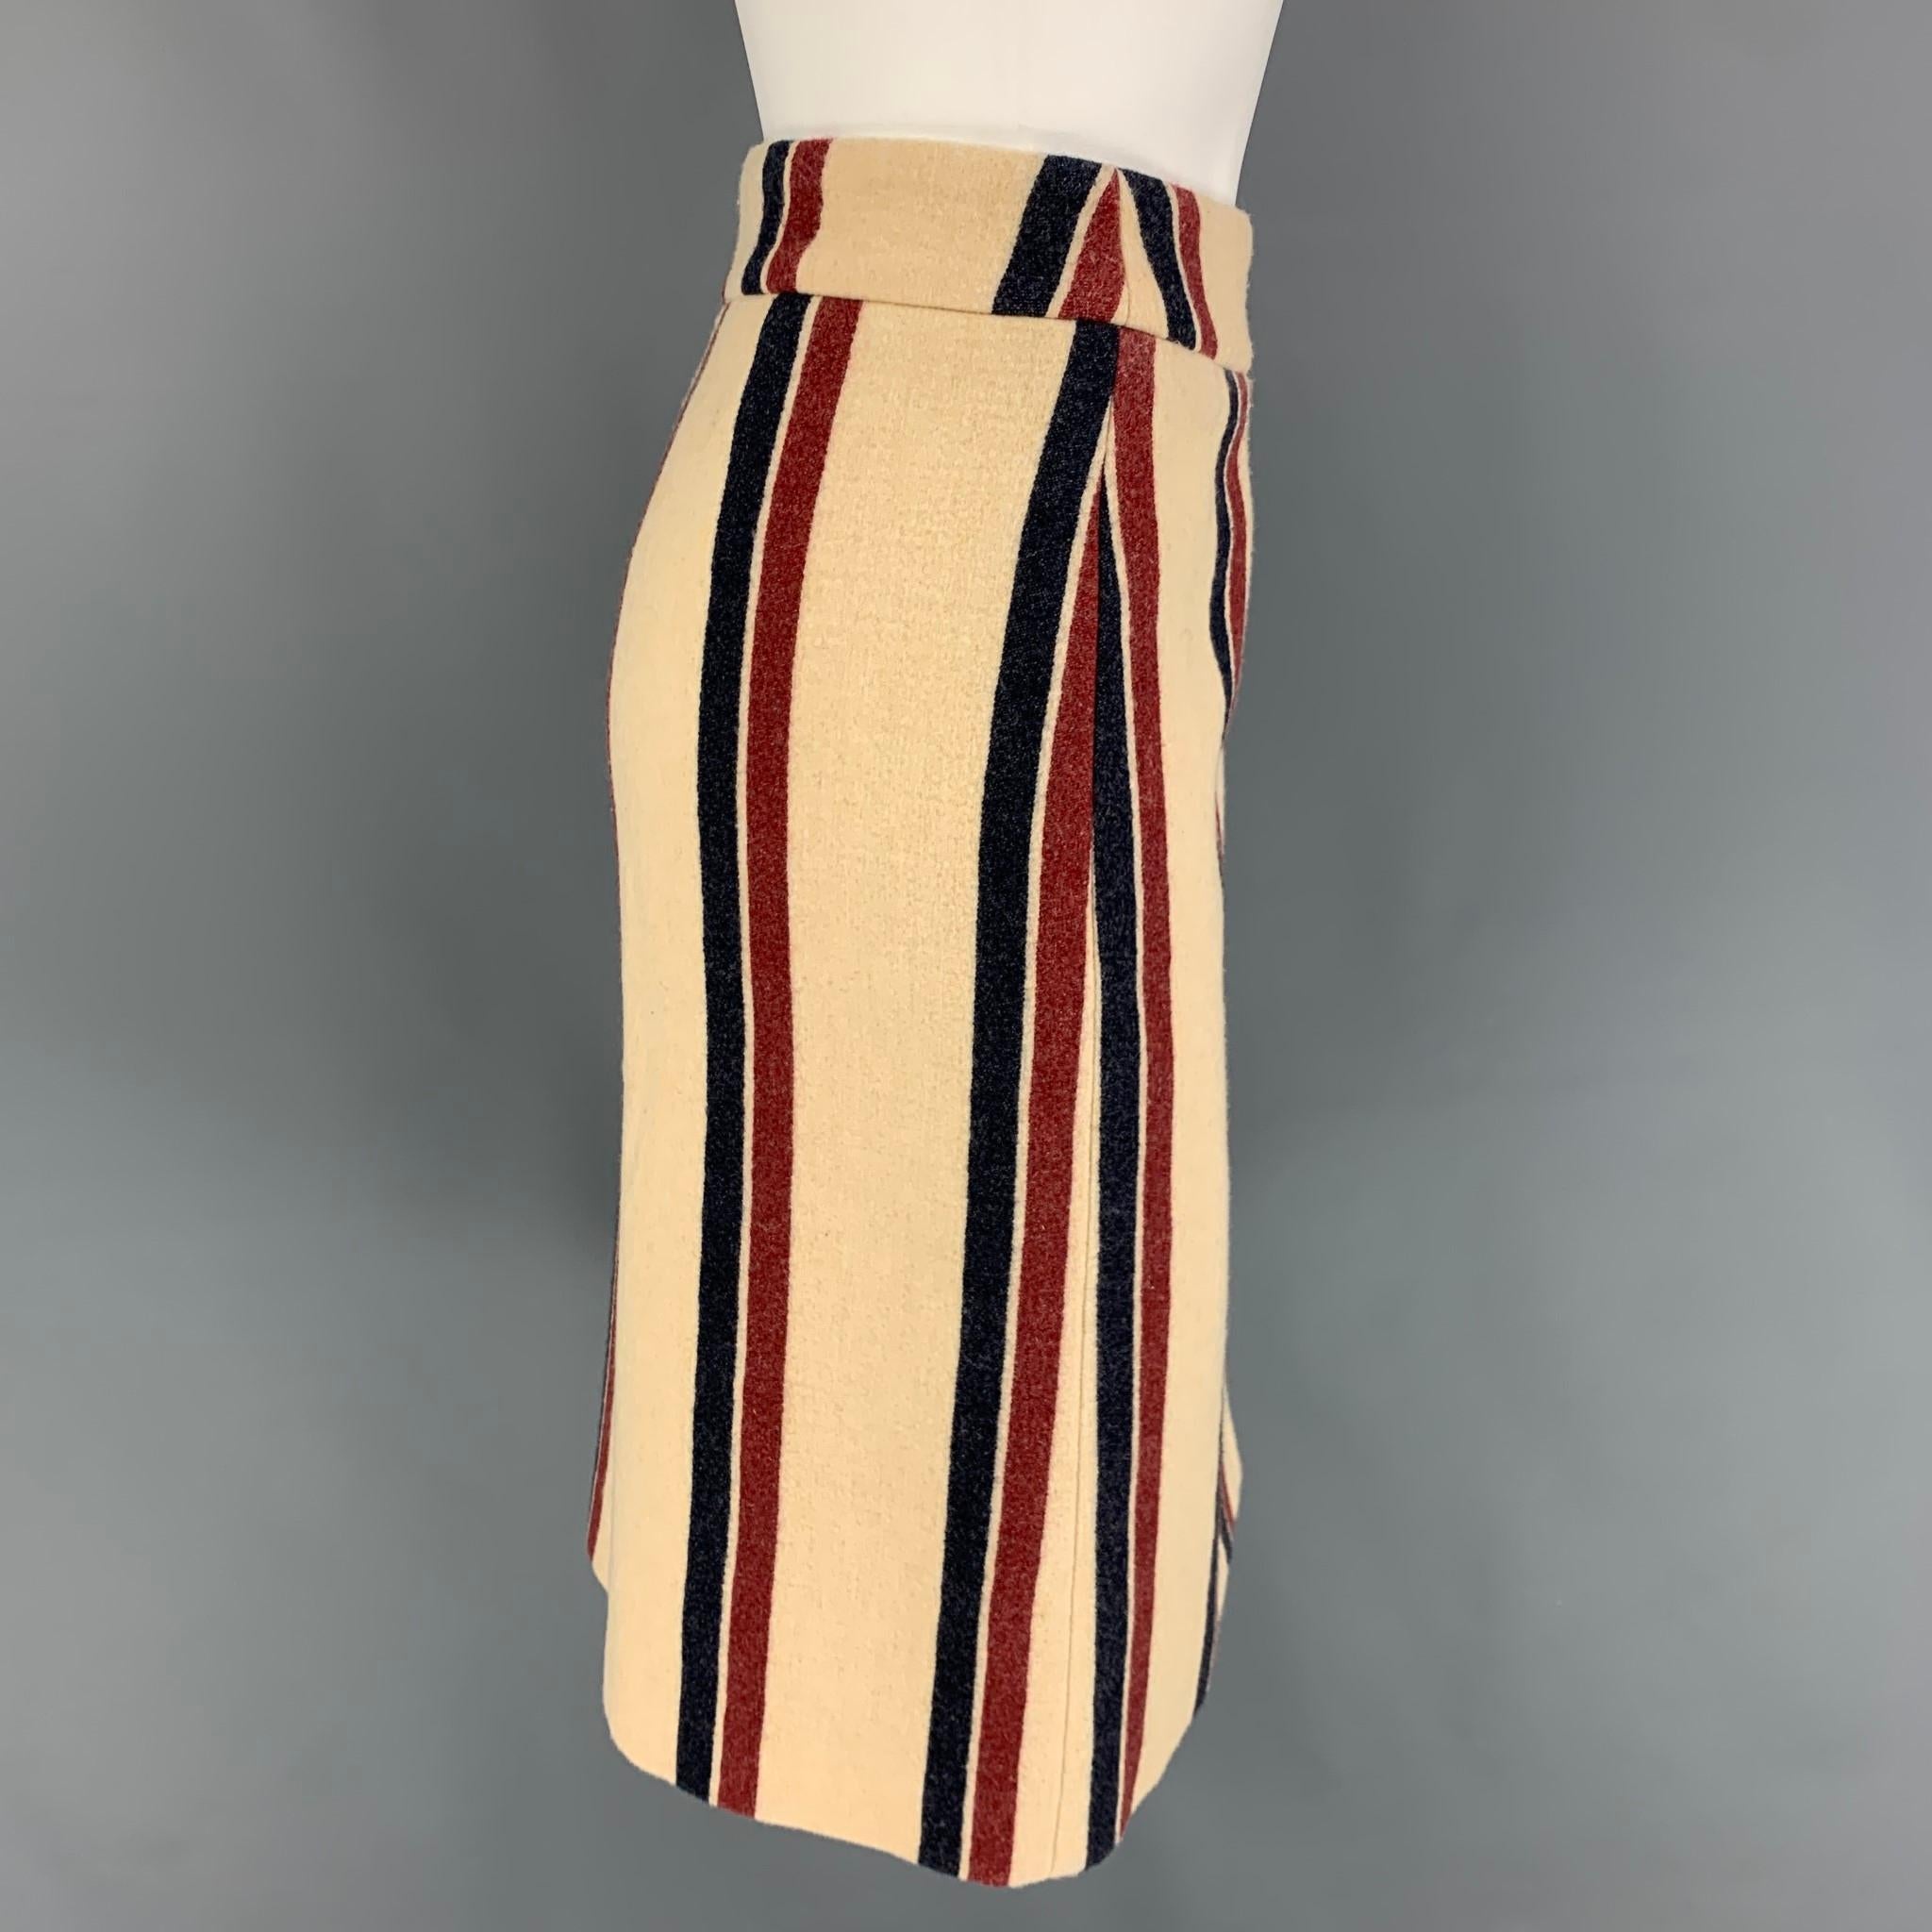 DRIES VAN NOTEN skirt comes in a cream & red stripe wool / polyamide featuring a pencil style and a back zip up closure. 

Very Good Pre-Owned Condition.
Marked: 40

Measurements:

Waist: 34 in.
Hip: 40 in.
Length: 23 in. 